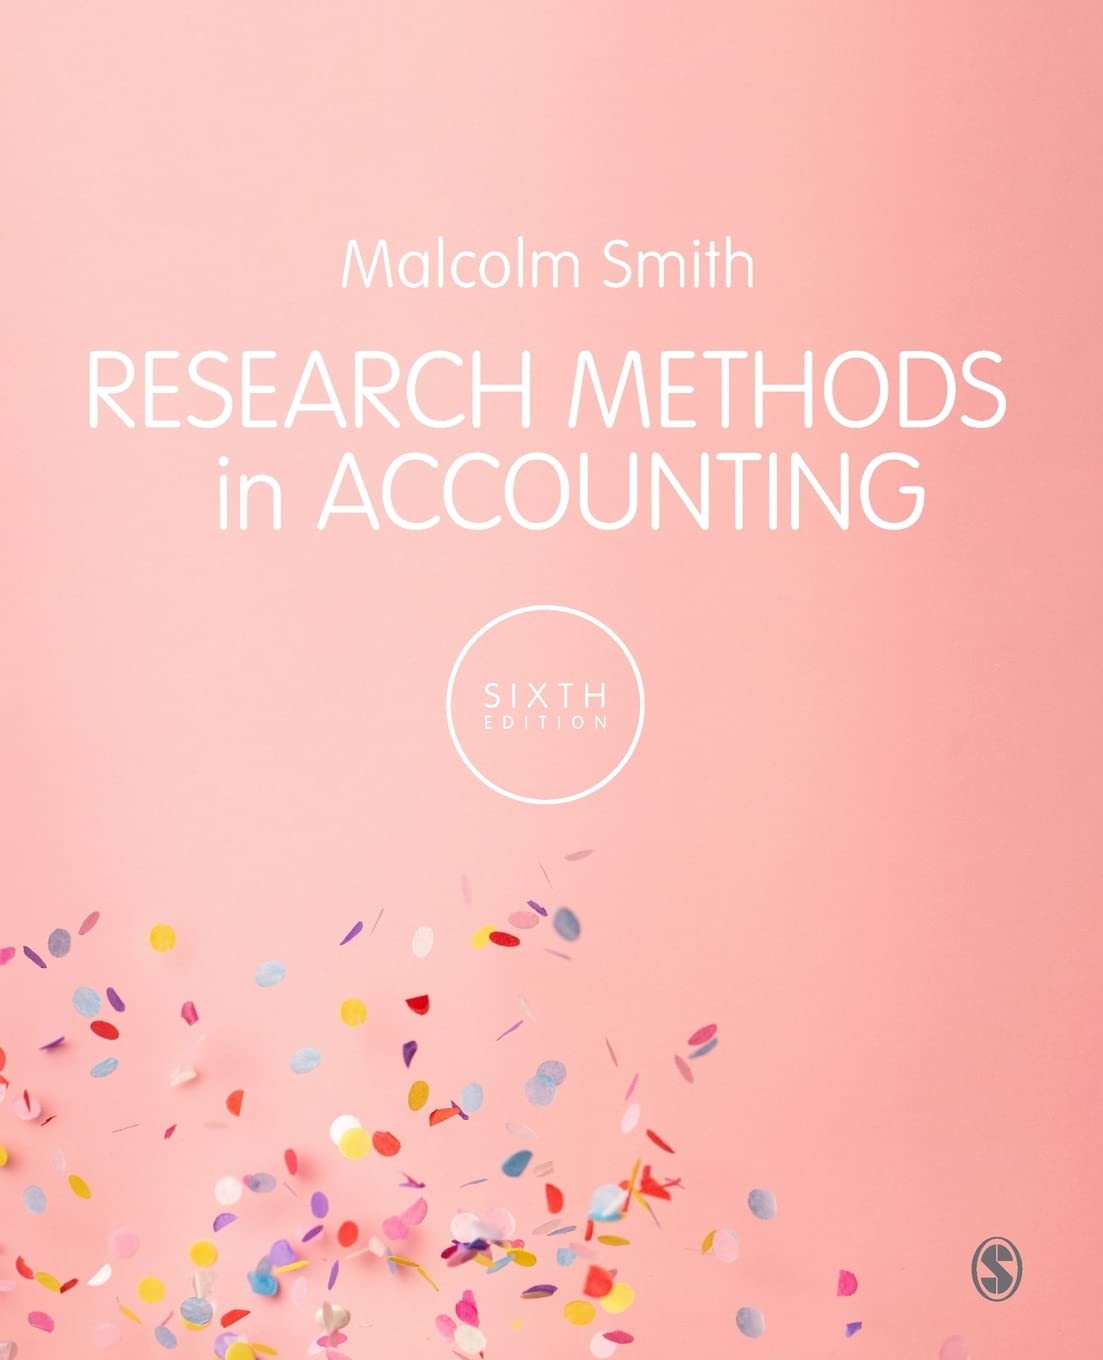 Research methods in accounting